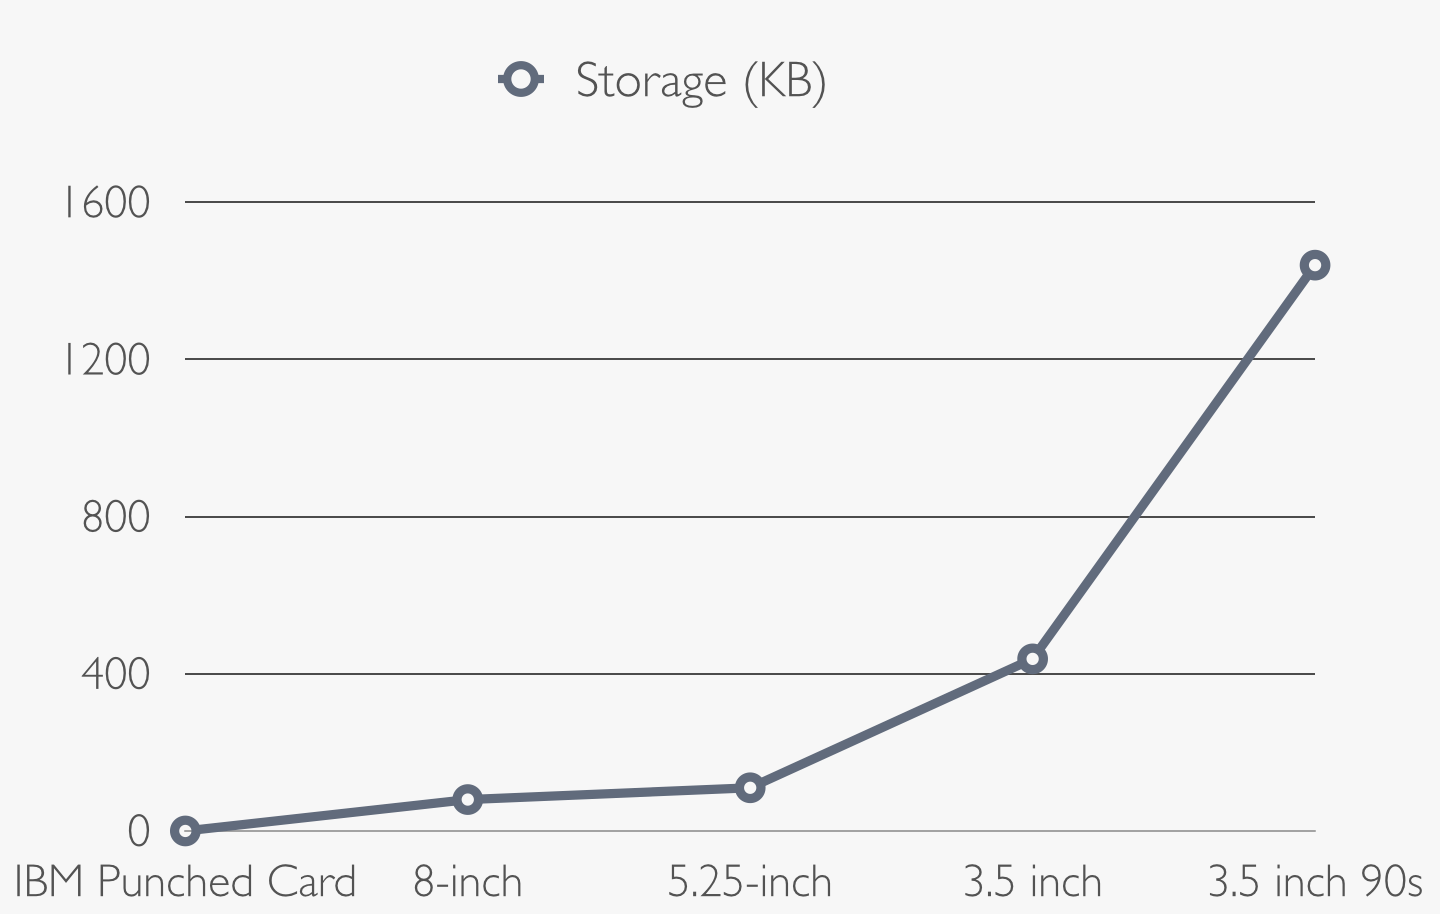 graphic of the floppies's storage